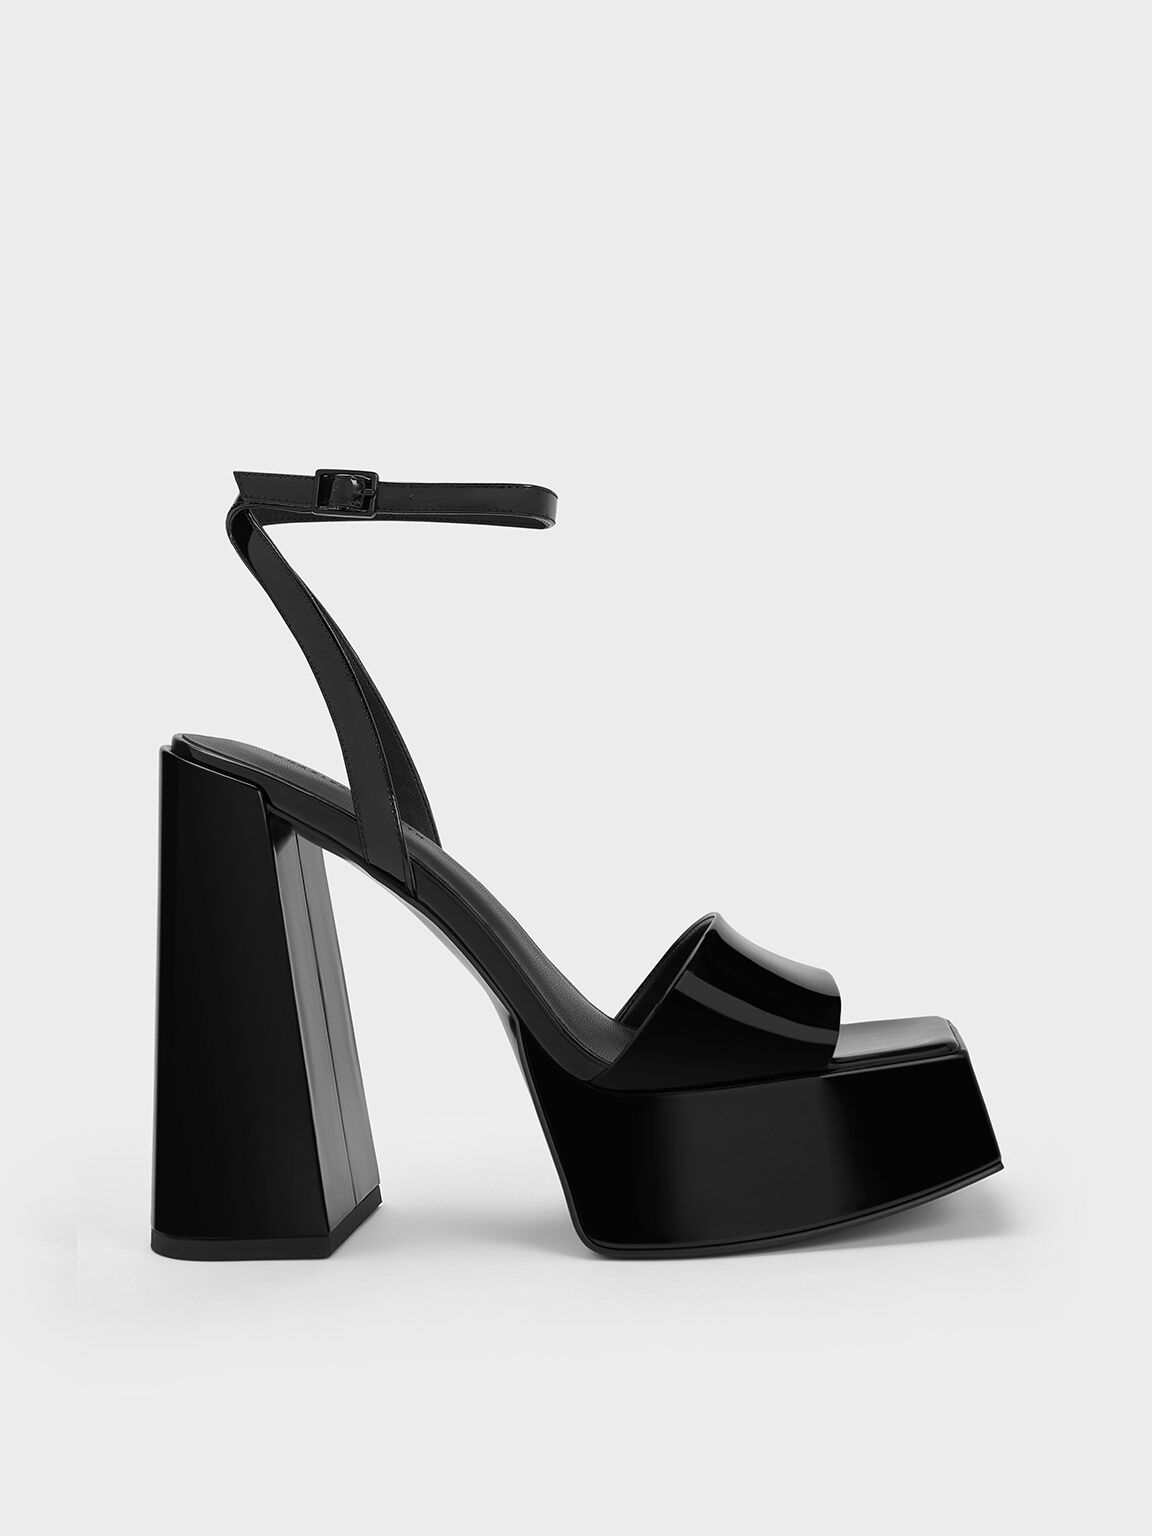 Charles & Keith Heeled Ankle Boots in Black Patent